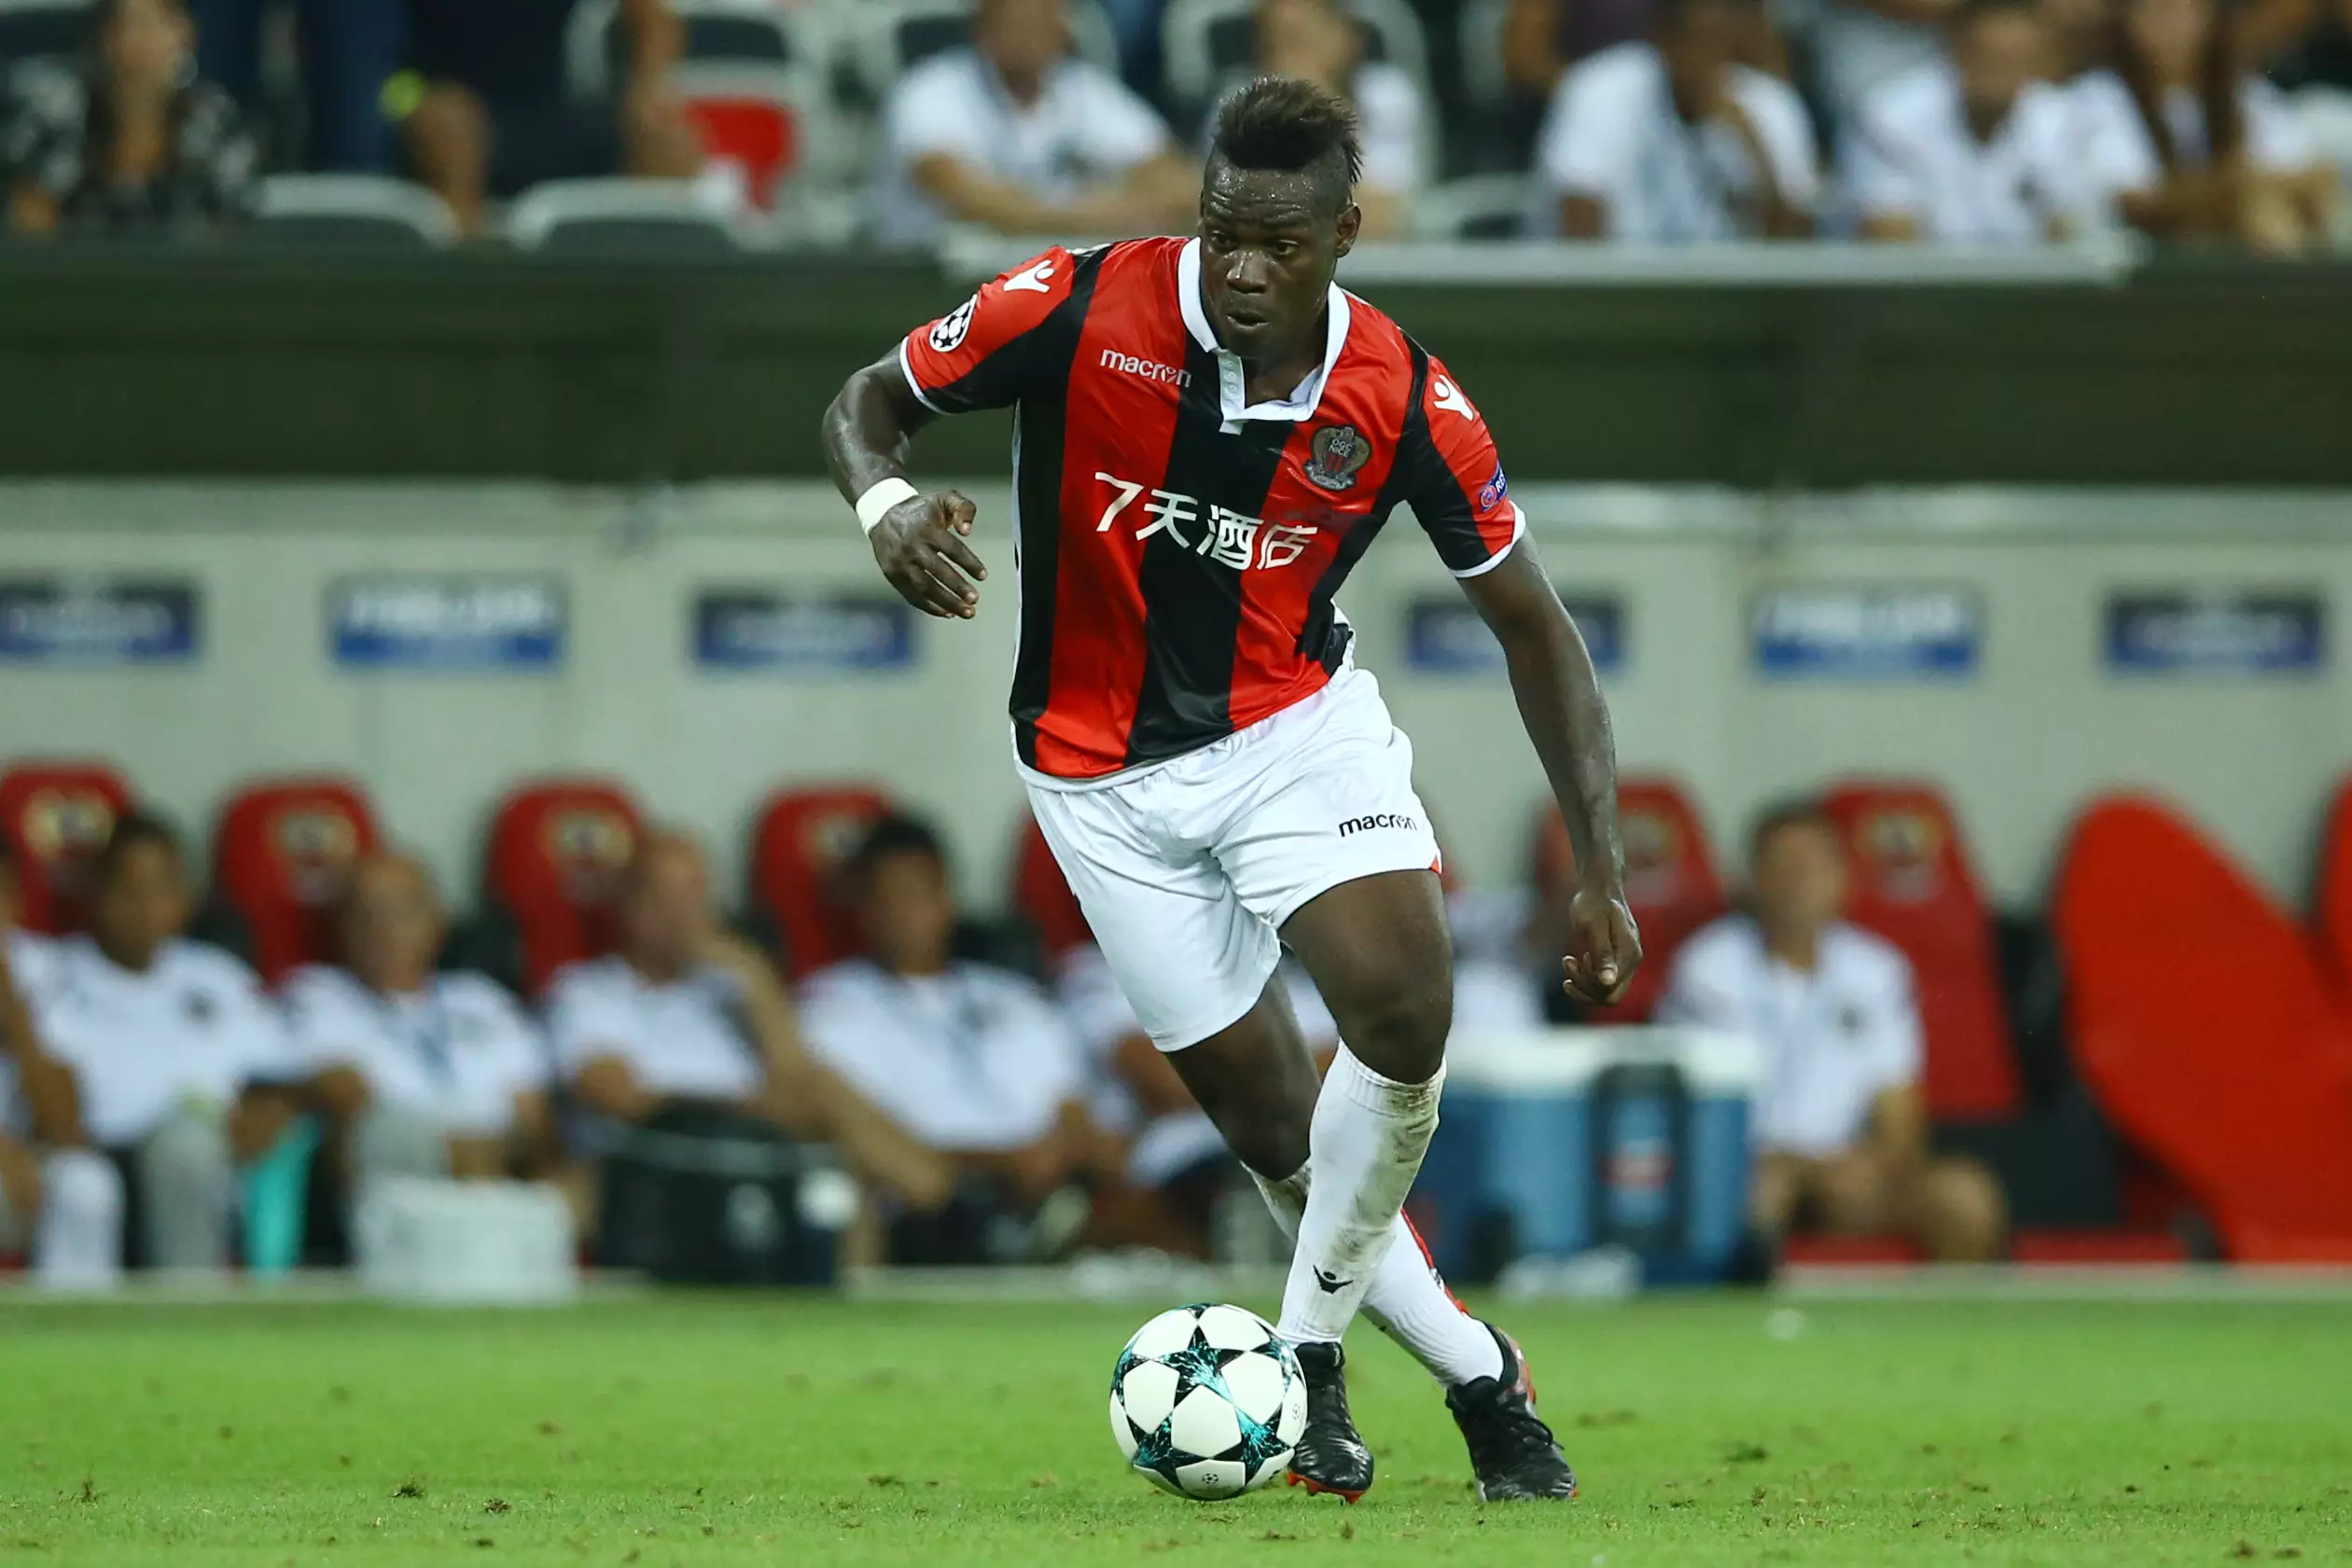 Balotelli in action for Nice. Image: PA